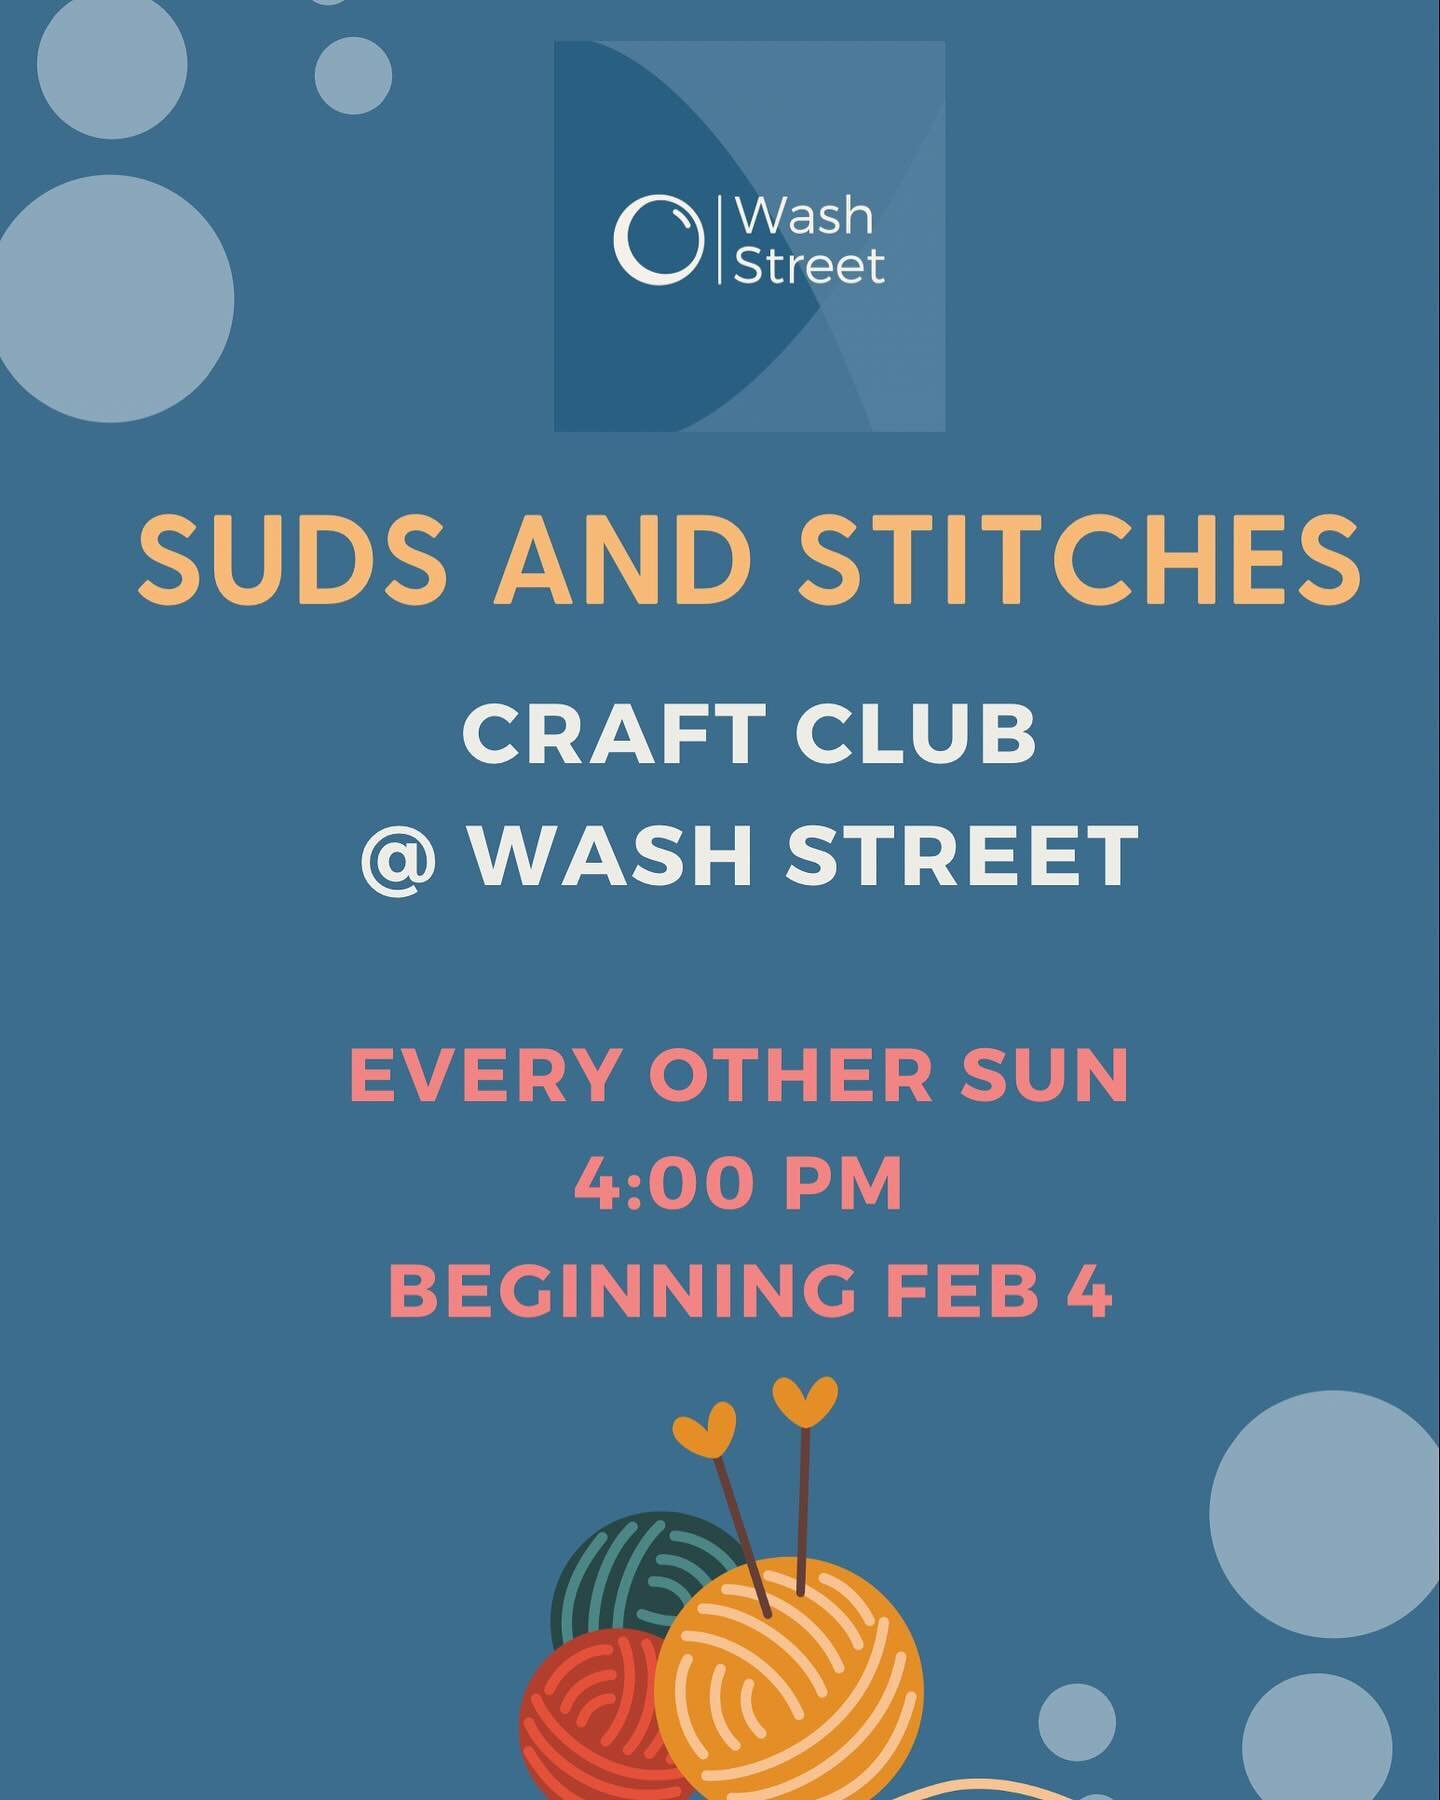 🧶 Excited to roll out some new in-person Wash Street activities in 2024 including craft club!
.
🧵We&rsquo;re so lucky to have some incredibly talented employees on our team who are willing to share their talents. Check out their work at our insta b